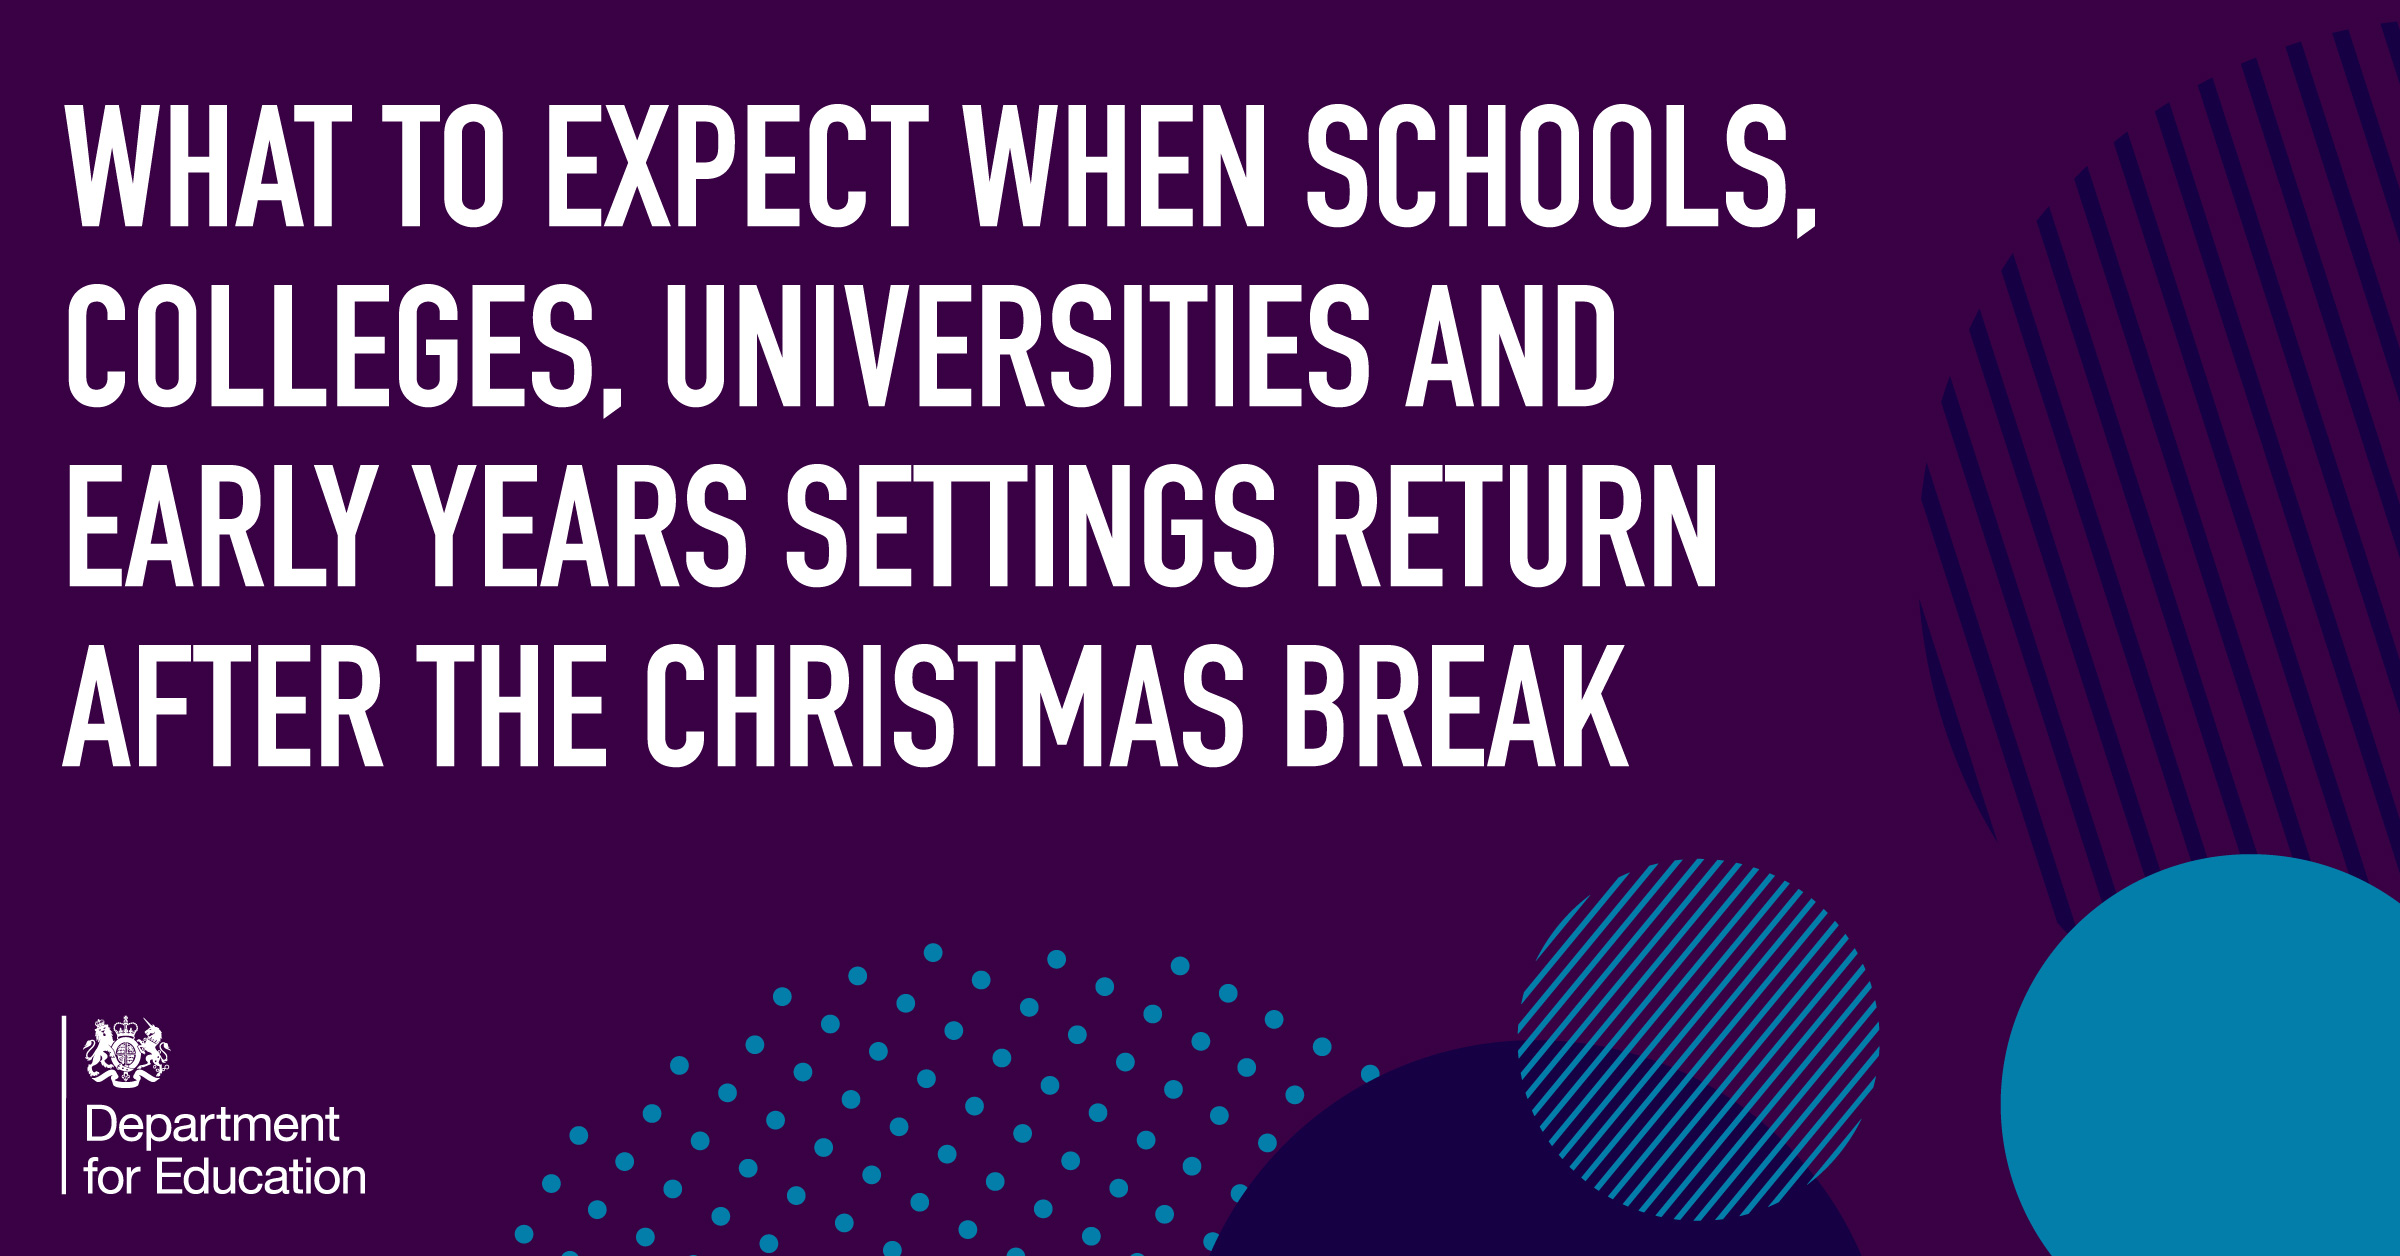 What to expect when schools, colleges, universities and early years